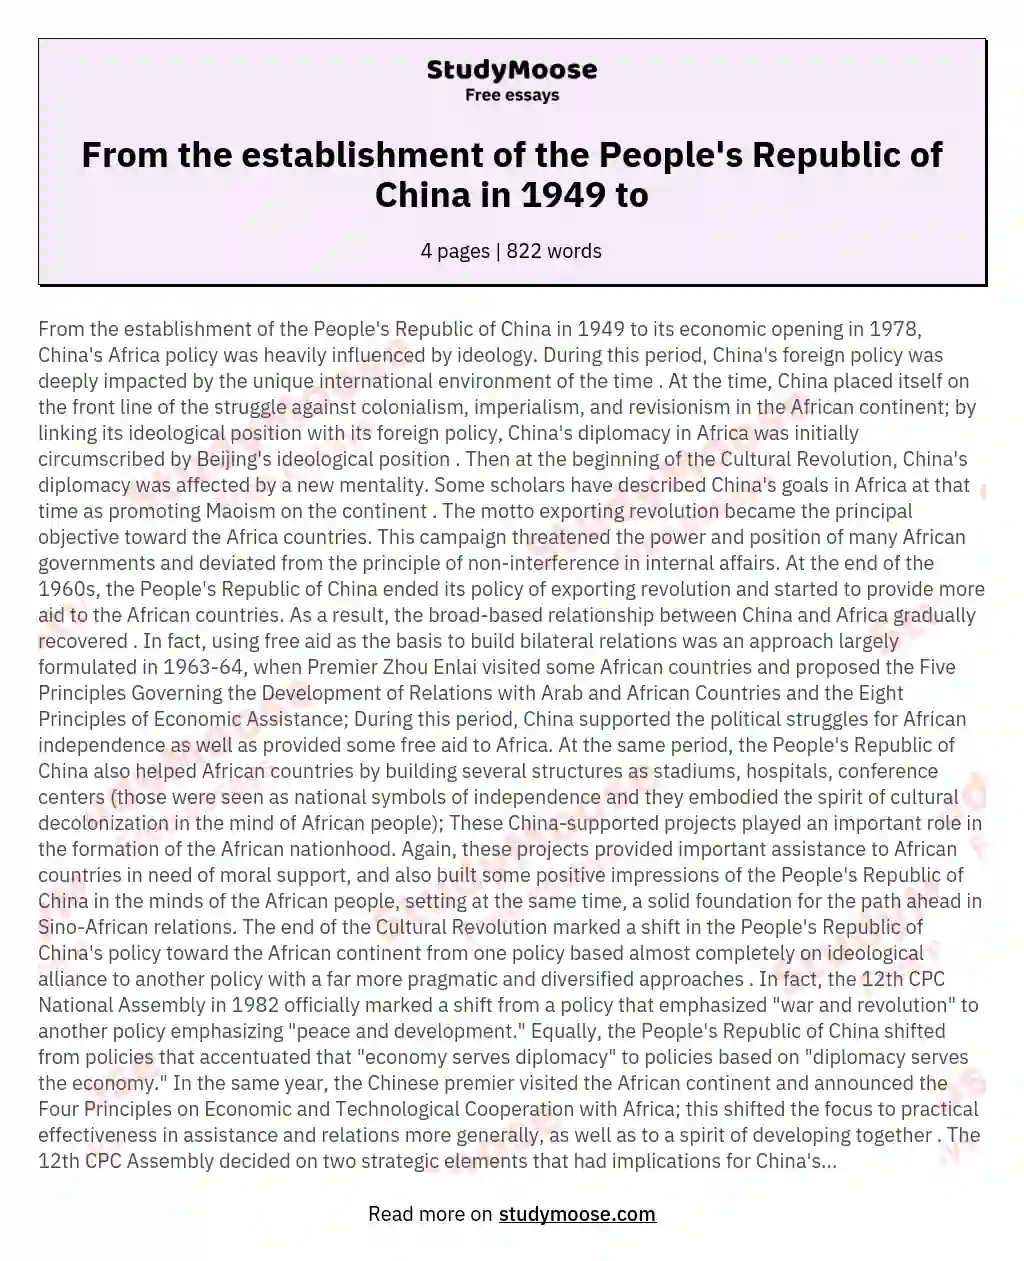 From the establishment of the People's Republic of China in 1949 to